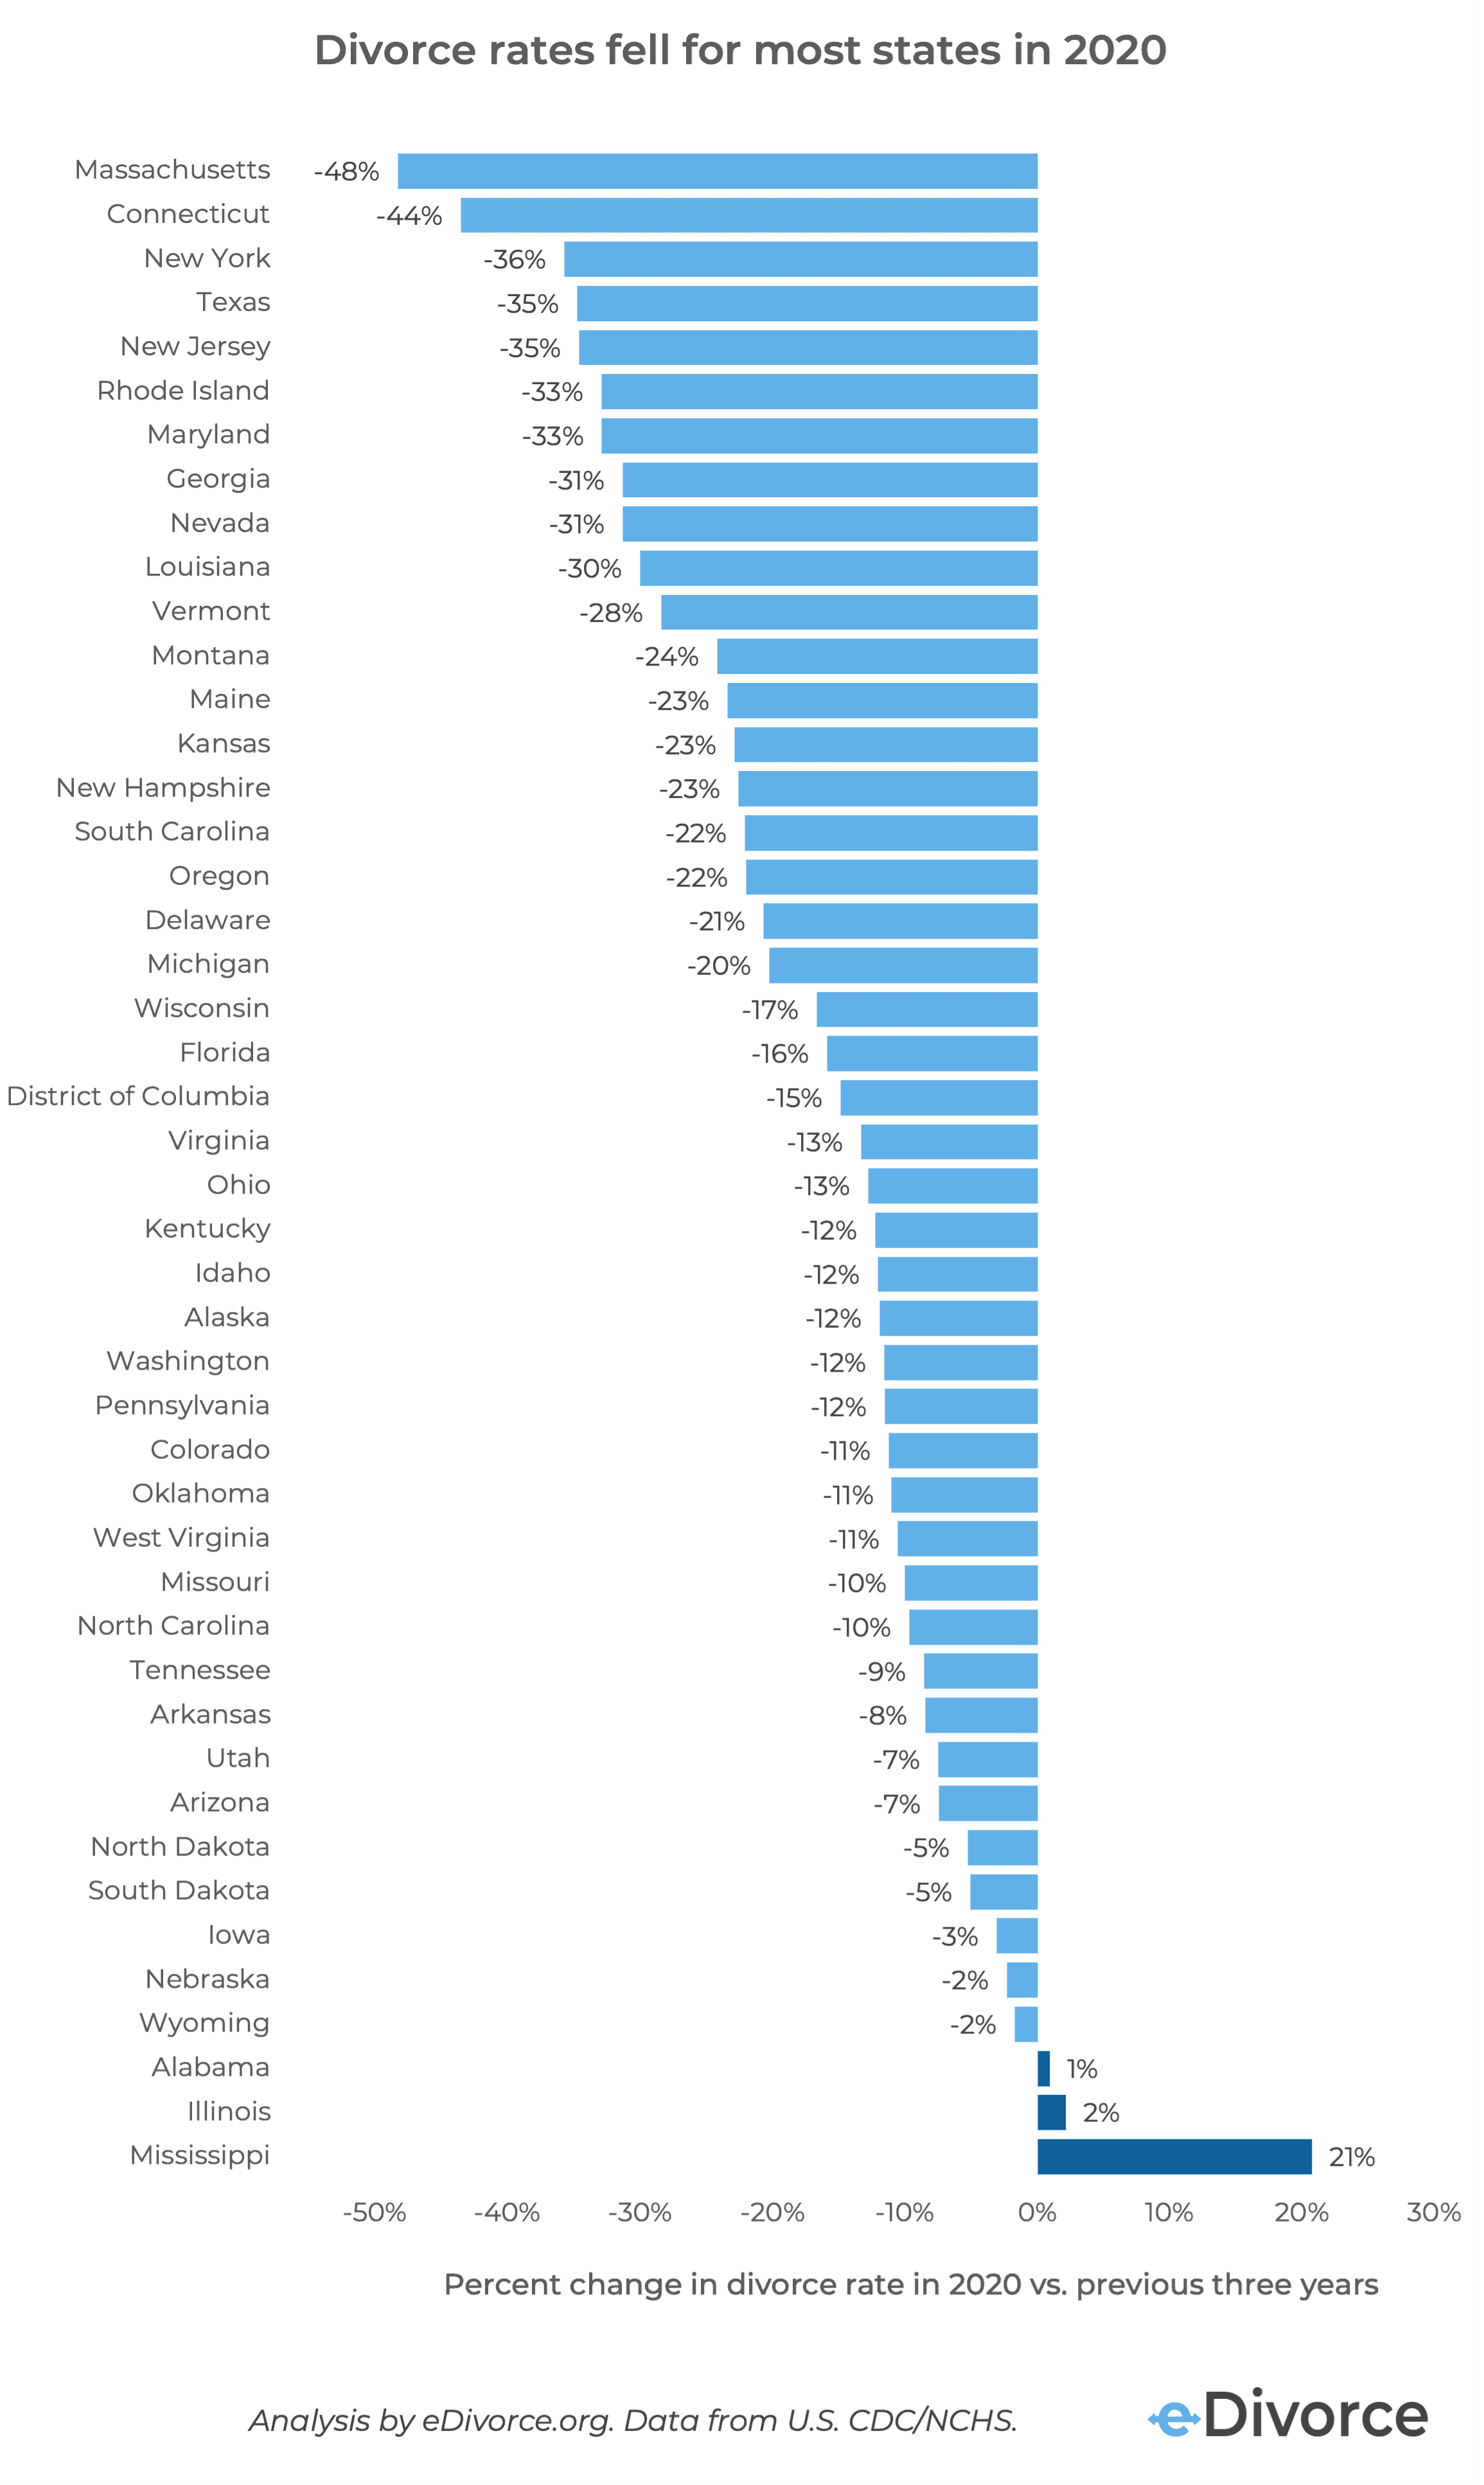 Horizontal bar chart of divorce rates by state for 2020